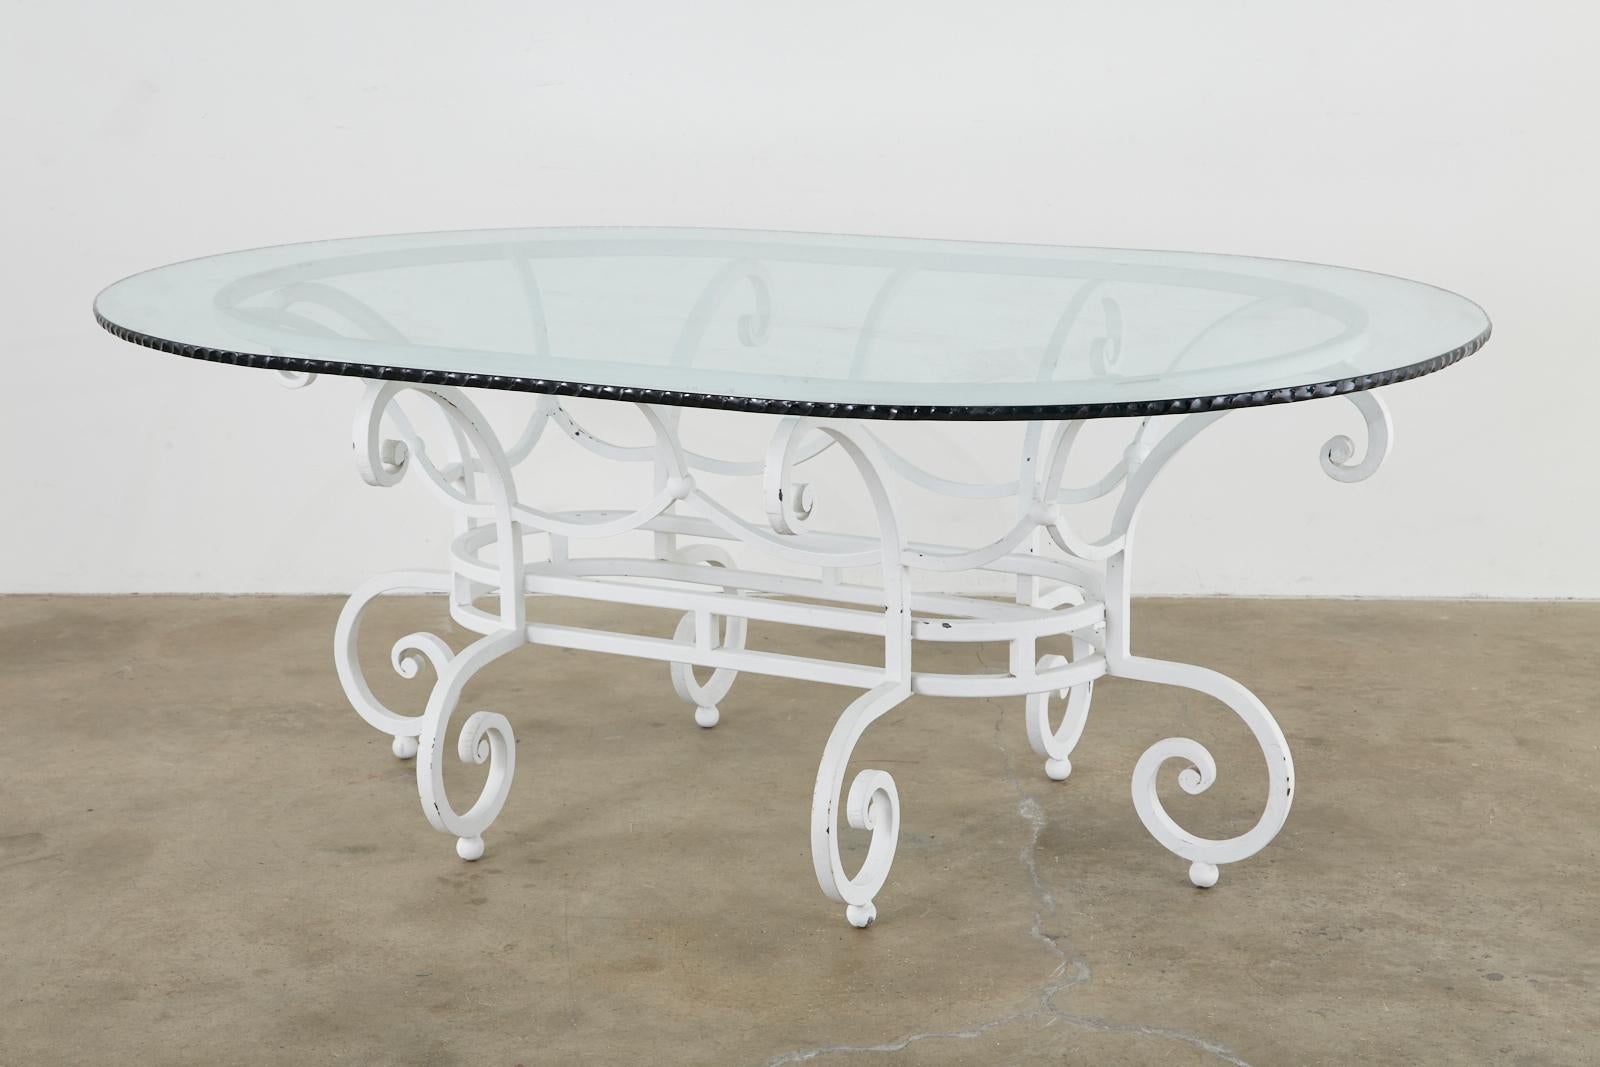 Impressive oval garden dining table featuring a large wrought iron base. Crafted from thick rods in a basket form with scrolled ends. The base is supported by six scrolled legs ending with ball feet. The large base is topped with a thick pane of